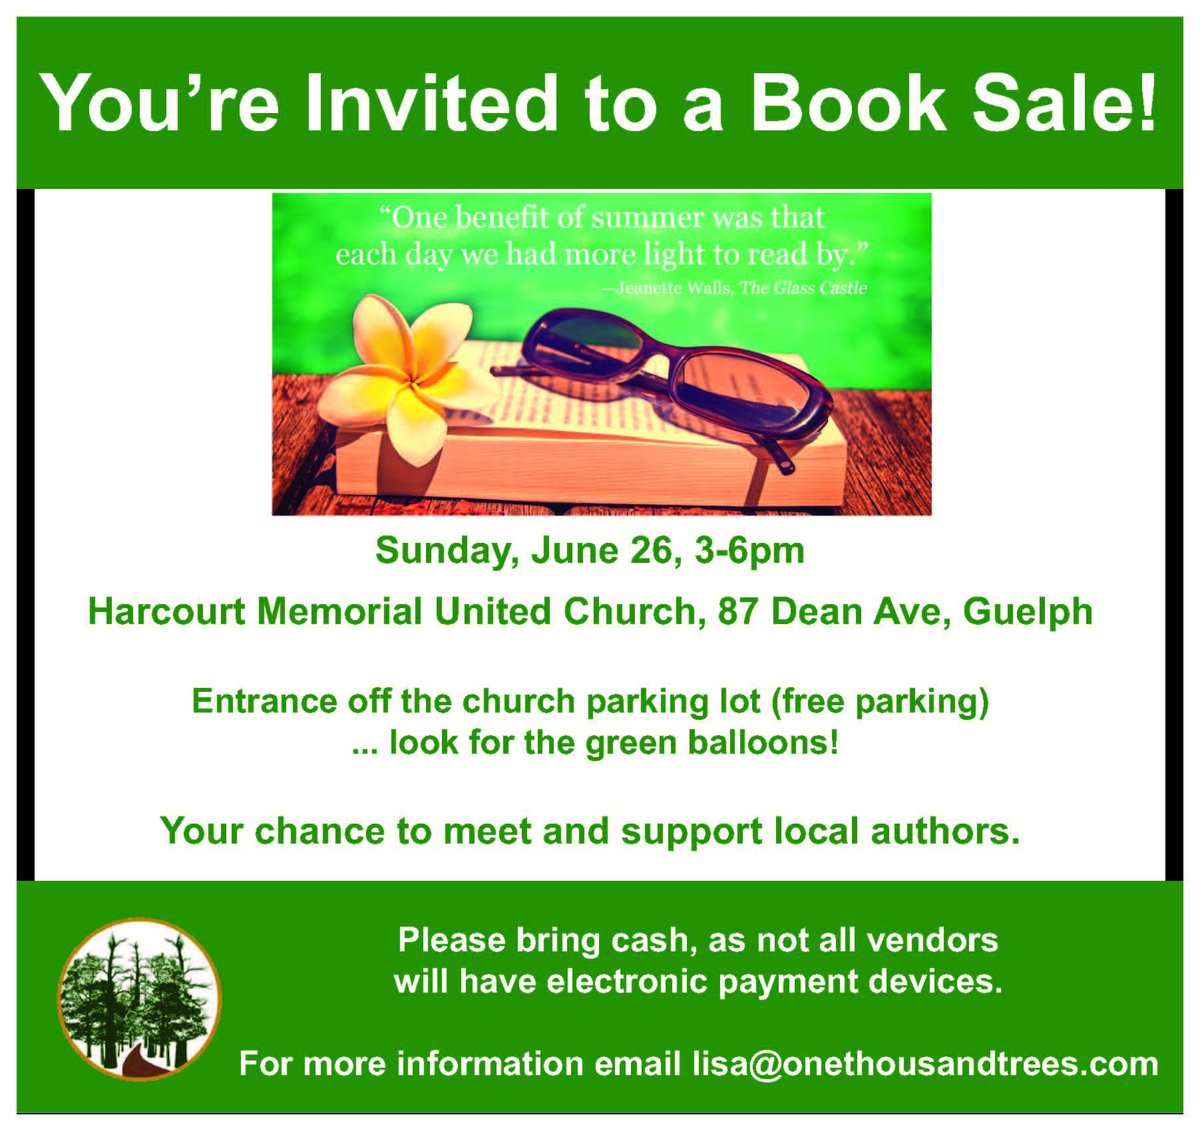 We're selling books at some events – On Sat June 25, 10AM-4PM at the Hillsburgh Branch of the Wellington County Library at the Wellington County Writers Festival. On Sun June 26, 3PM-6PM at Harcourt United Church at the One Thousand Trees book sale. We'd love to see you out!